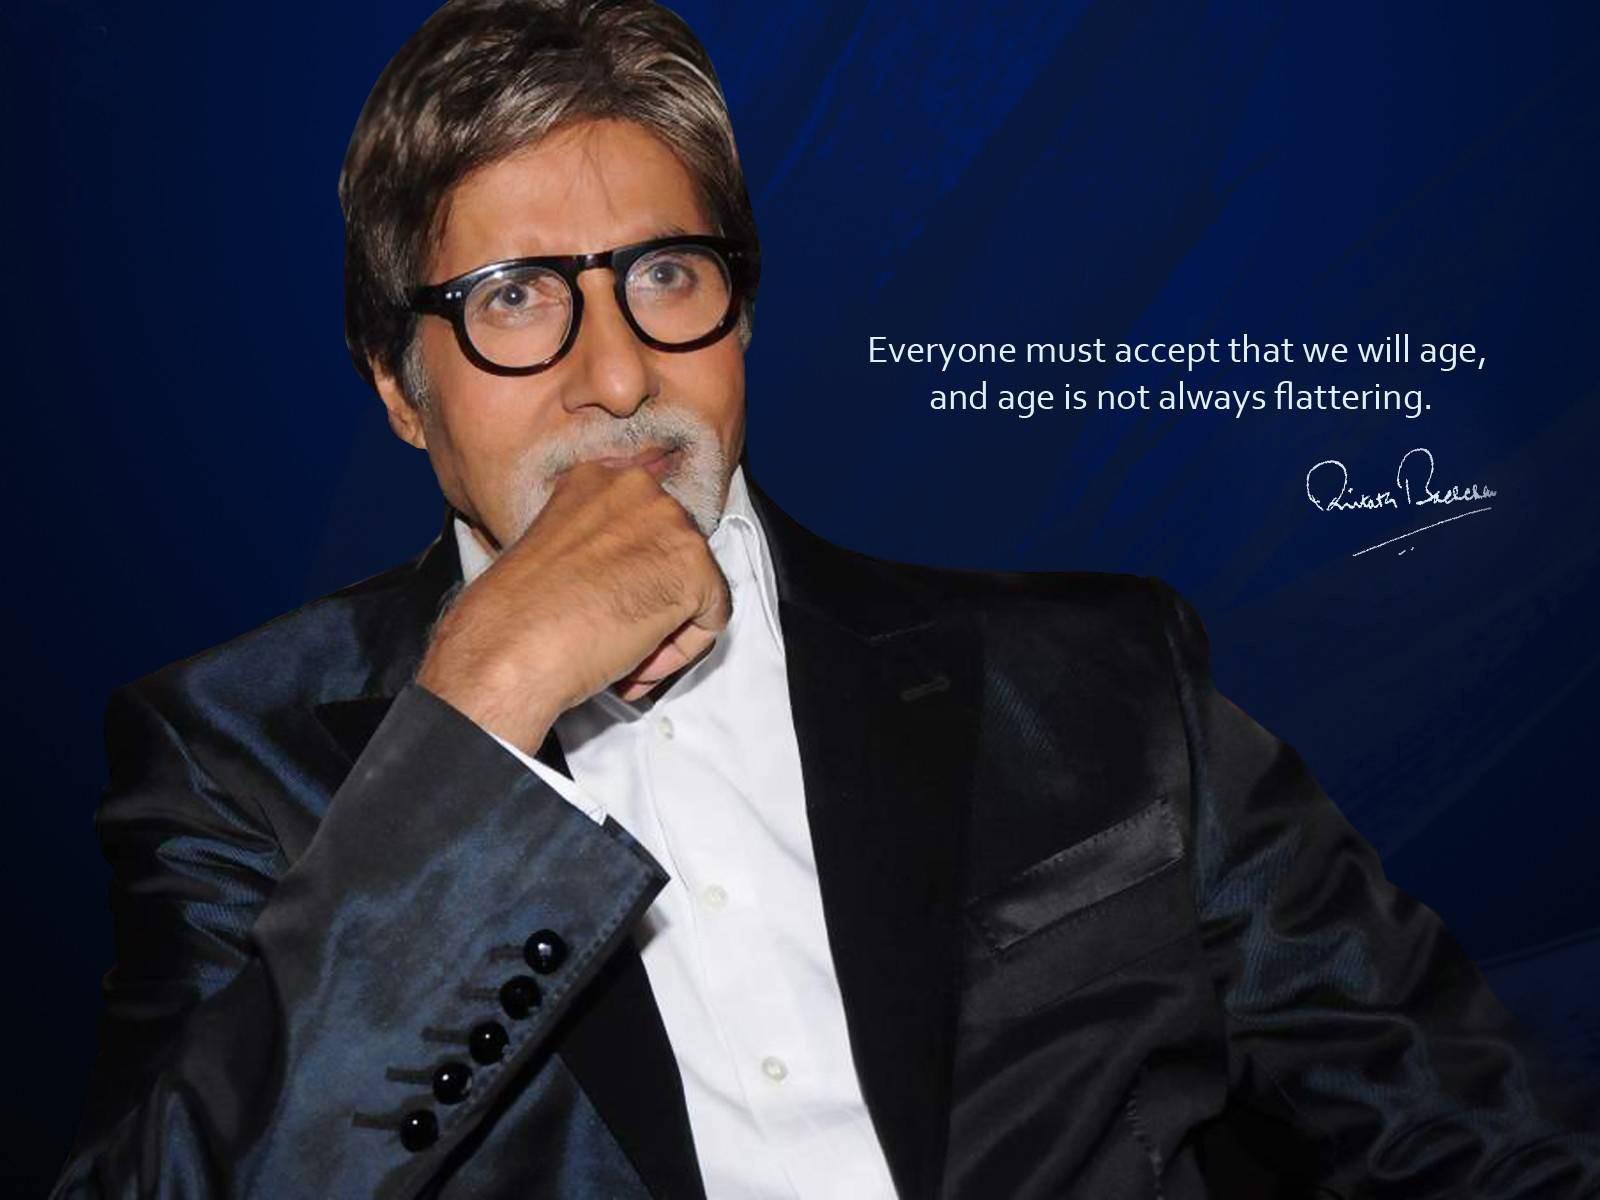 Hd Awesome Beautiful Quote Of Bollywood Actor Amitabh - Amitabh Bachchan Images Download Free - HD Wallpaper 